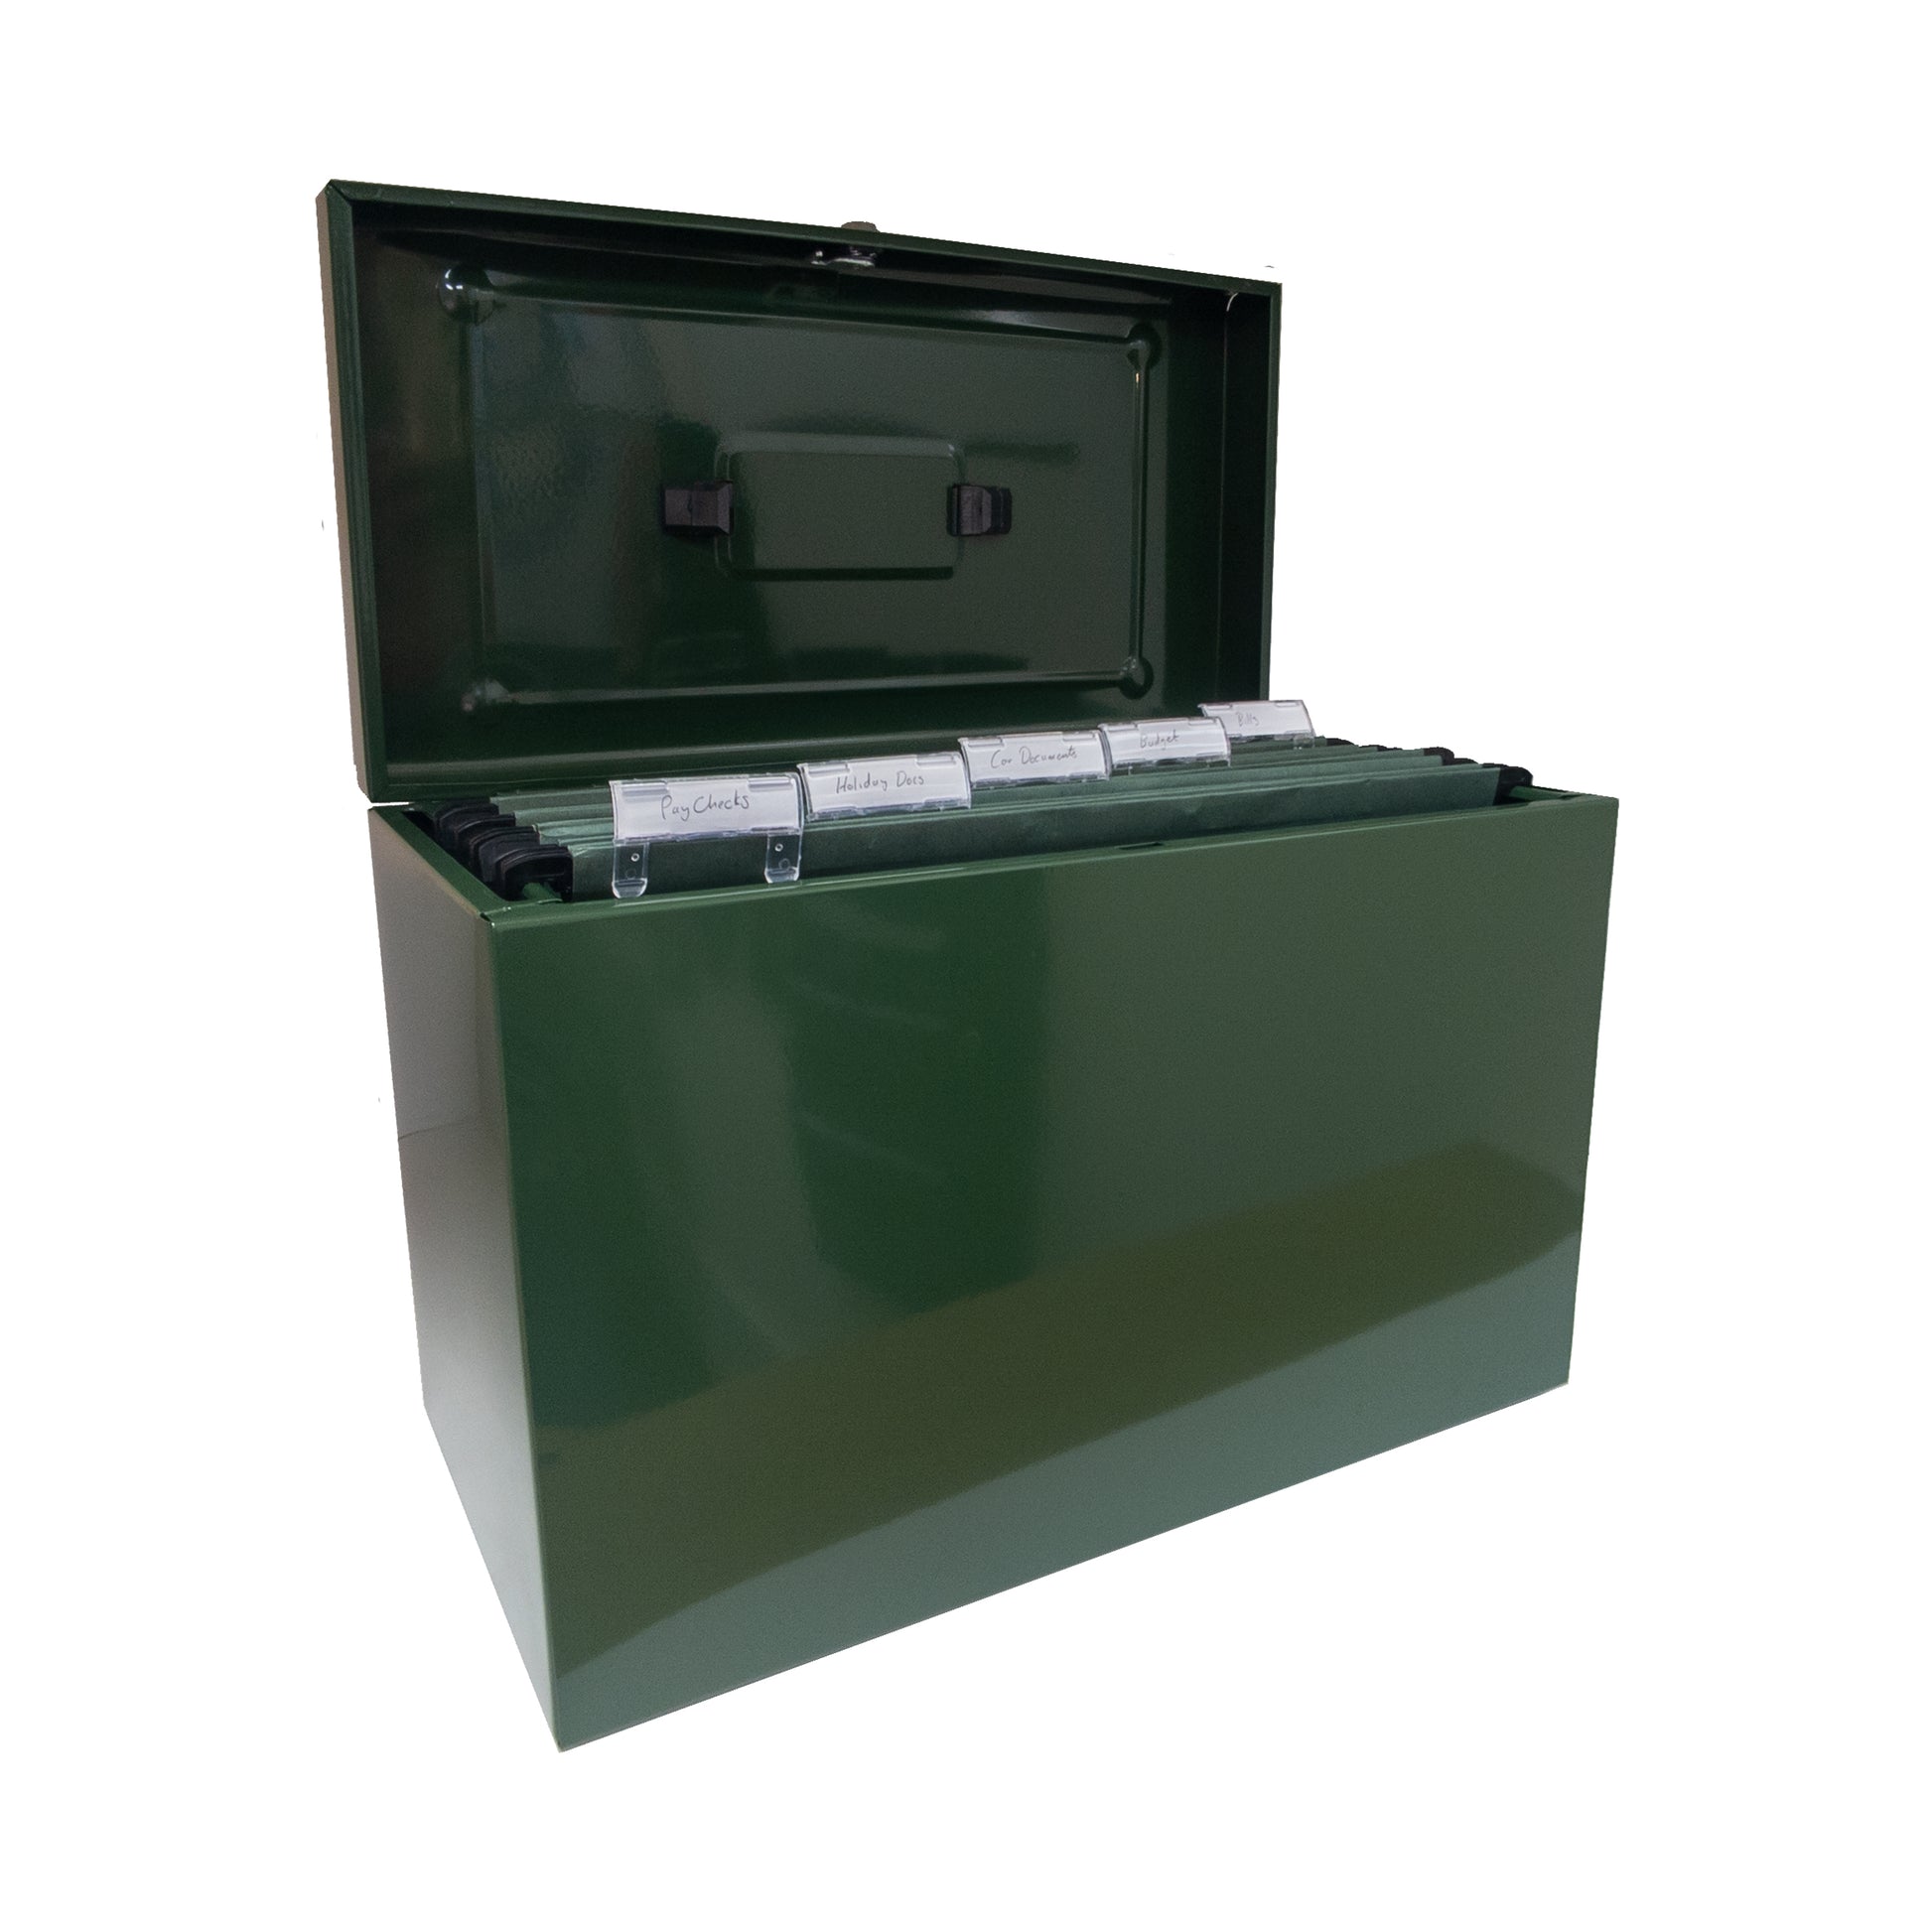 Open British racing green A4+ (Foolscap) steel home file box with five green suspension files inside, all with handwritten labels including 'Bills', 'Budget', 'Current Year', and others demonstrating organized document storage. 